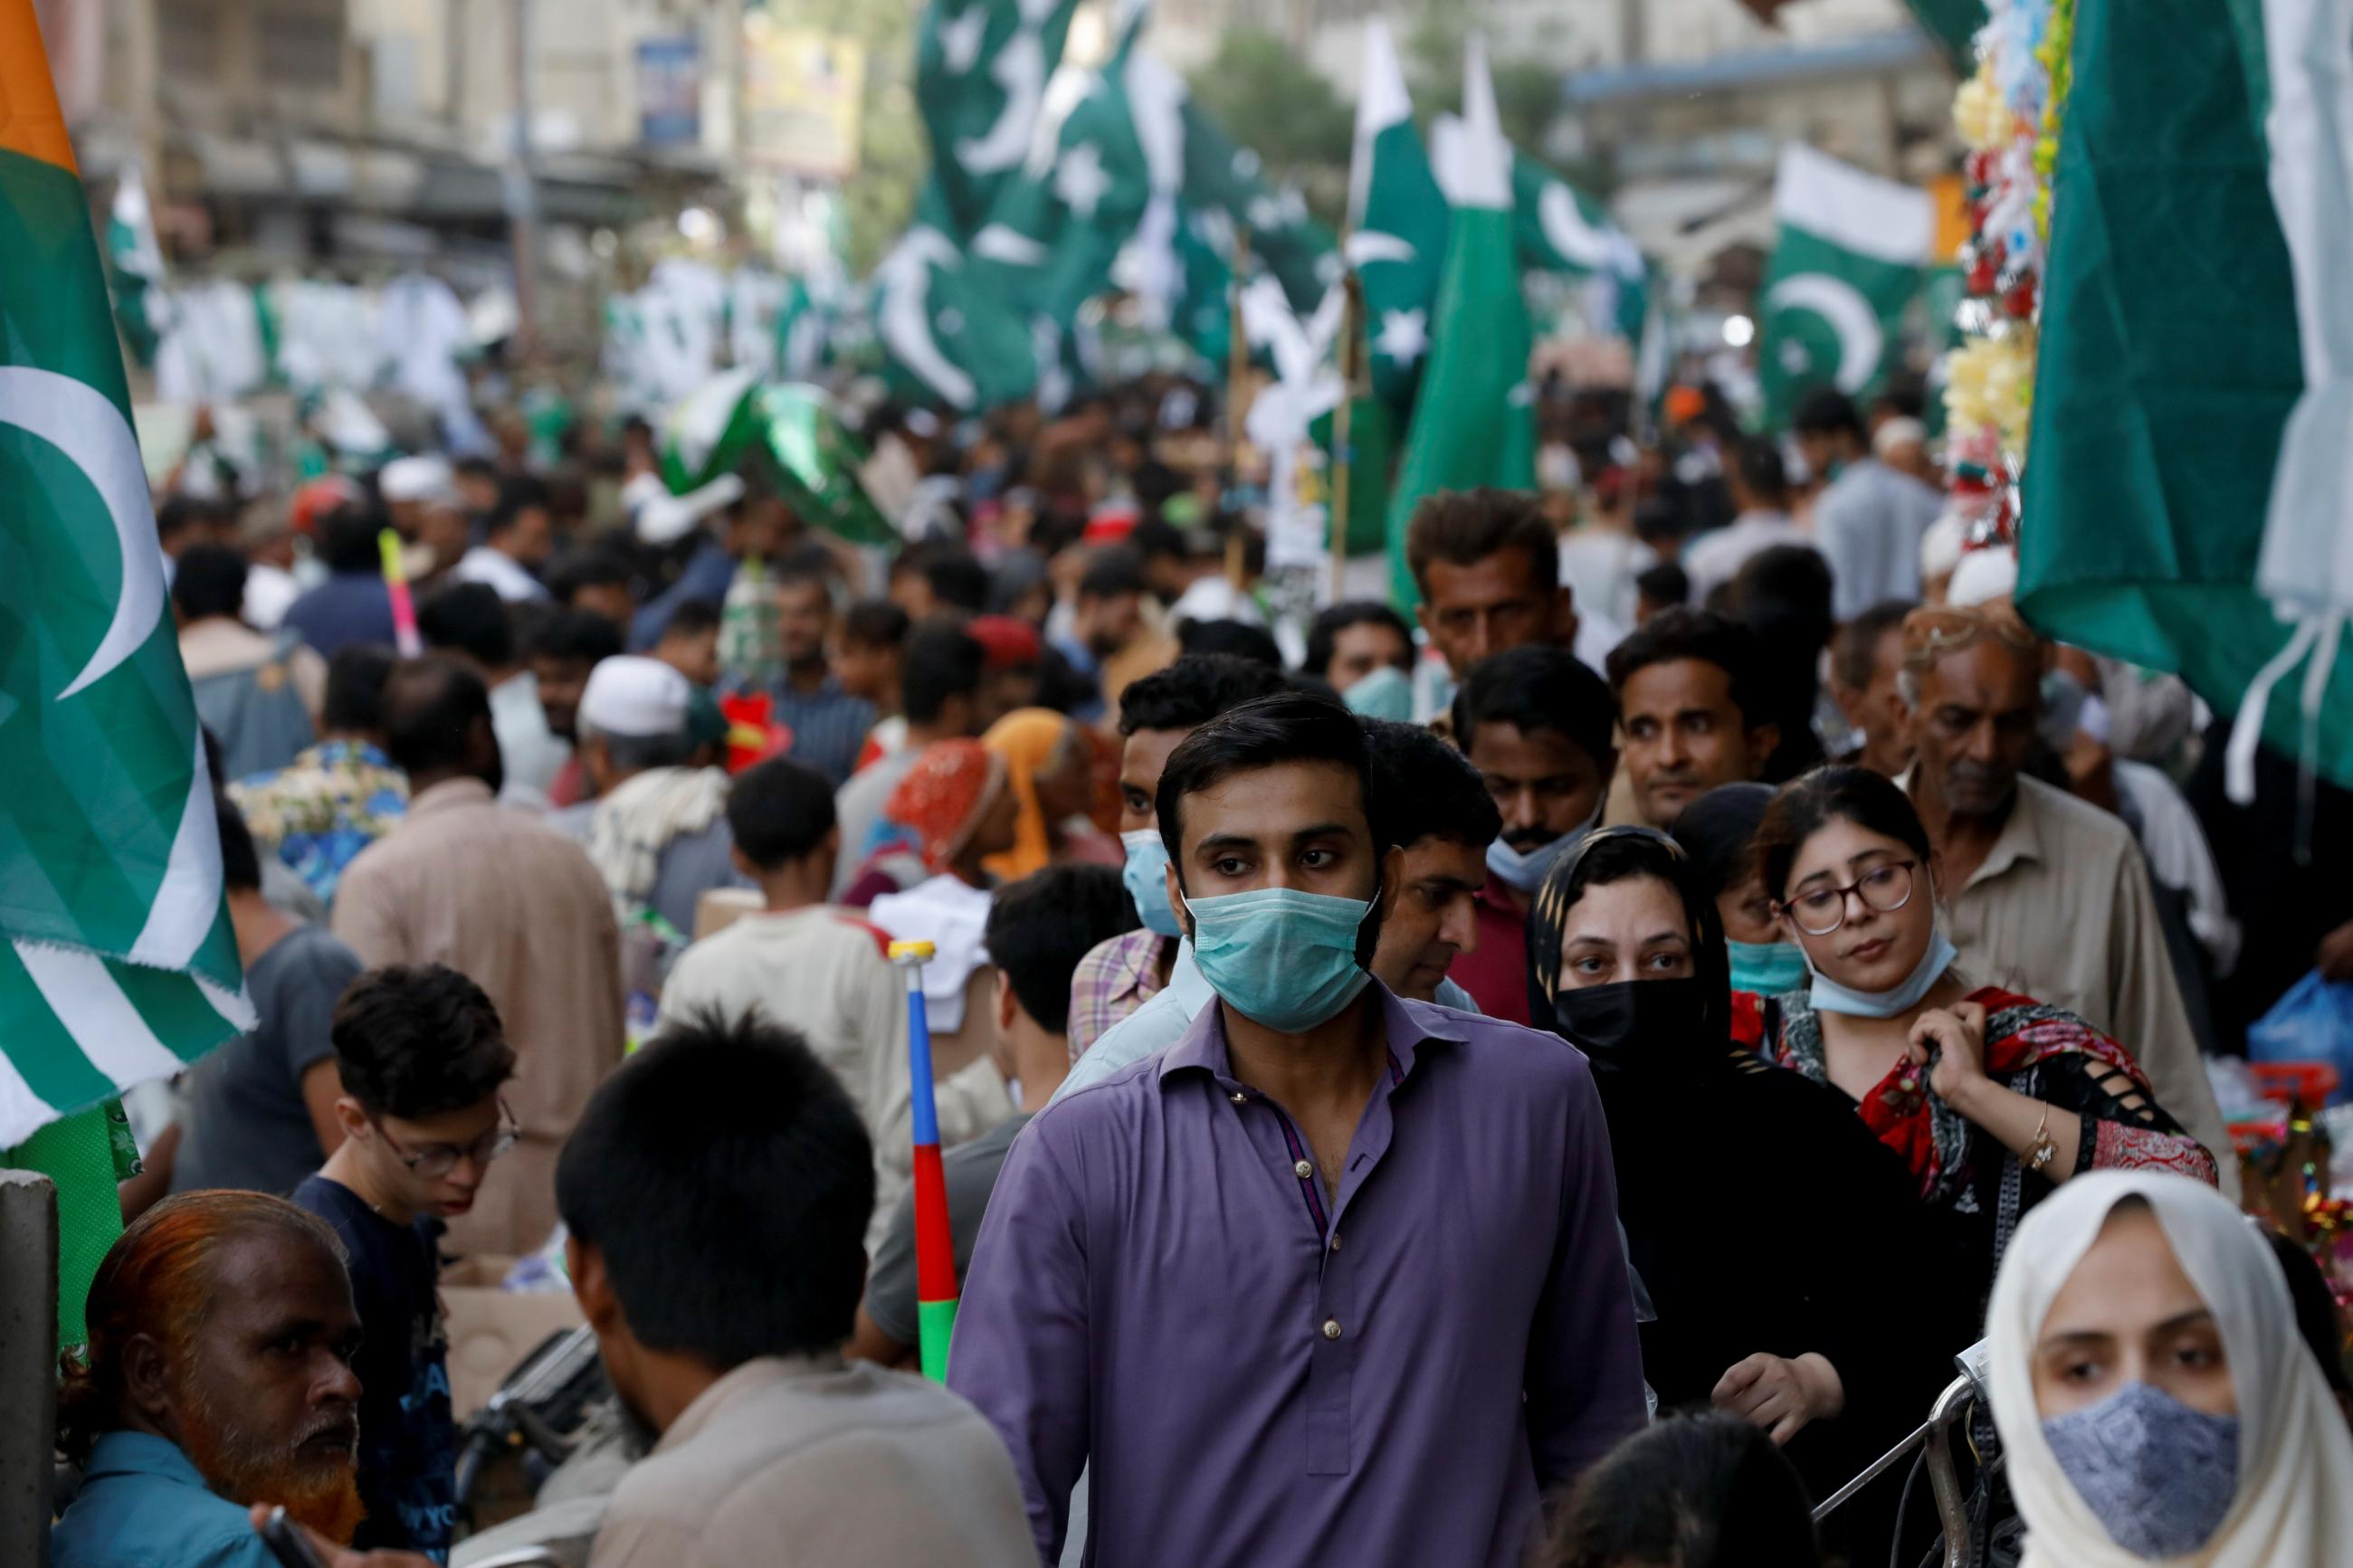 A busy street a few days ahead of Pakistan's Independence Day, amid the COVID pandemic in Karachi, Pakistan, on August 11, 2021.